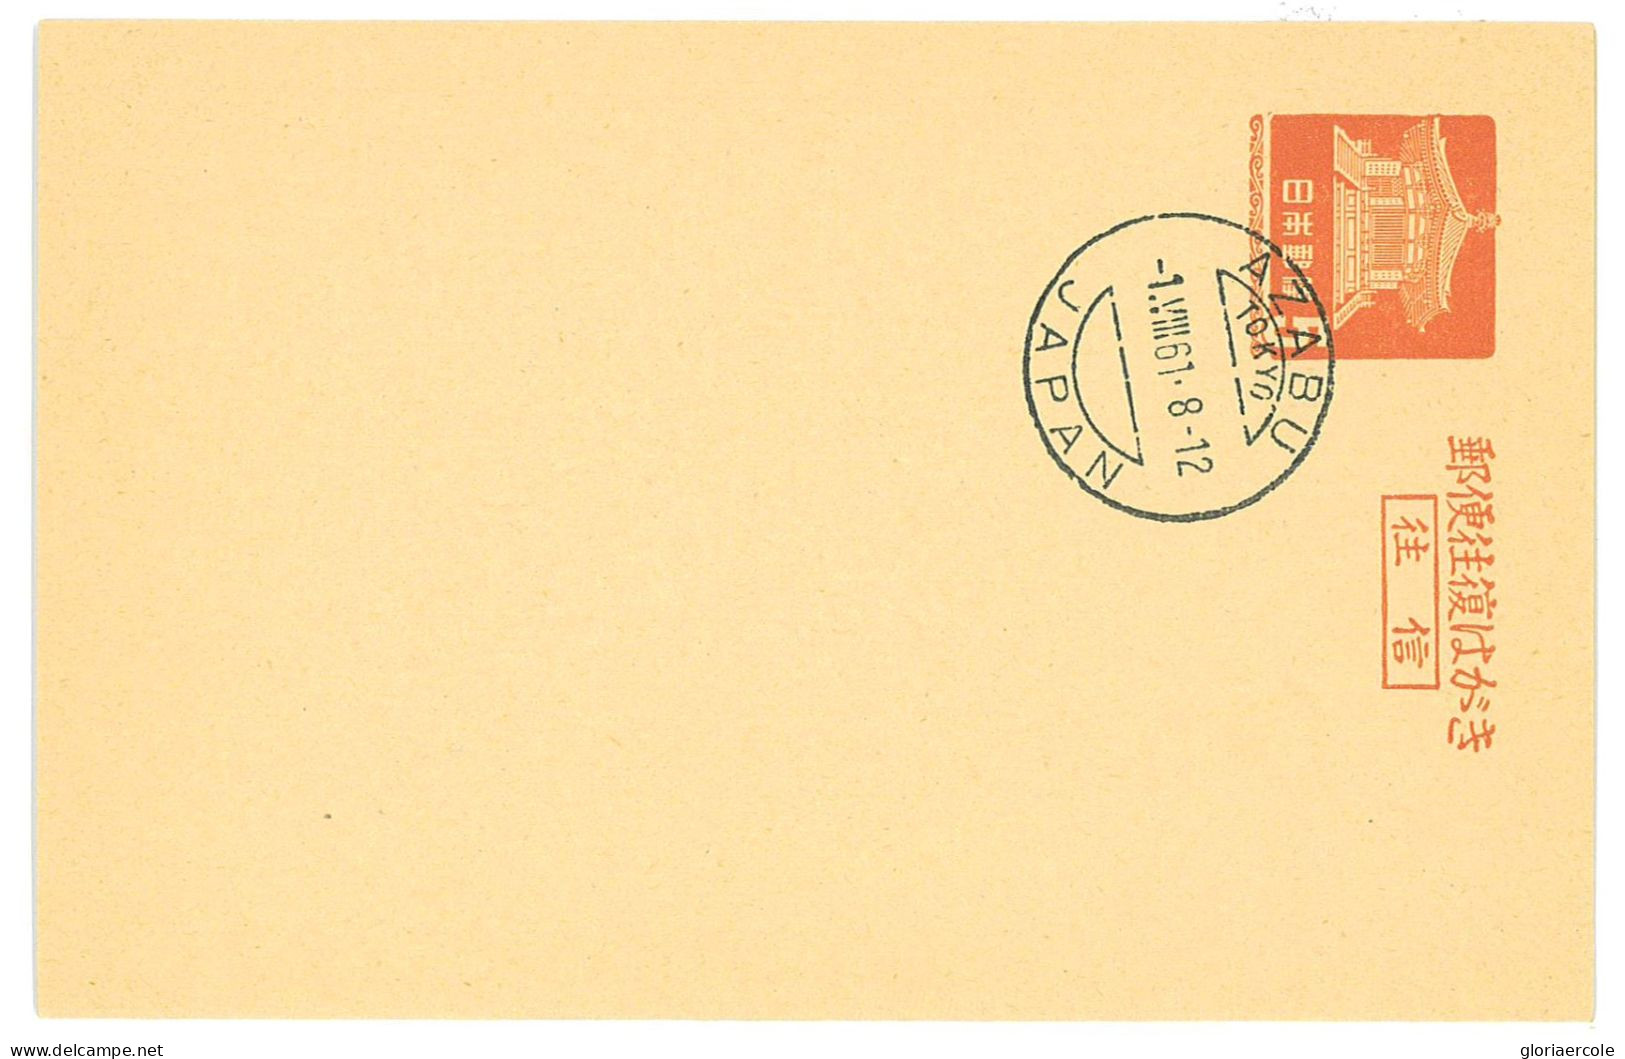 P2806 - JAPAN, SMALL LOT OF POSTAL STATIONARY USED WITH FAVOR CANCELLATIONS 10 DIFFERENT PIECES 1950/60